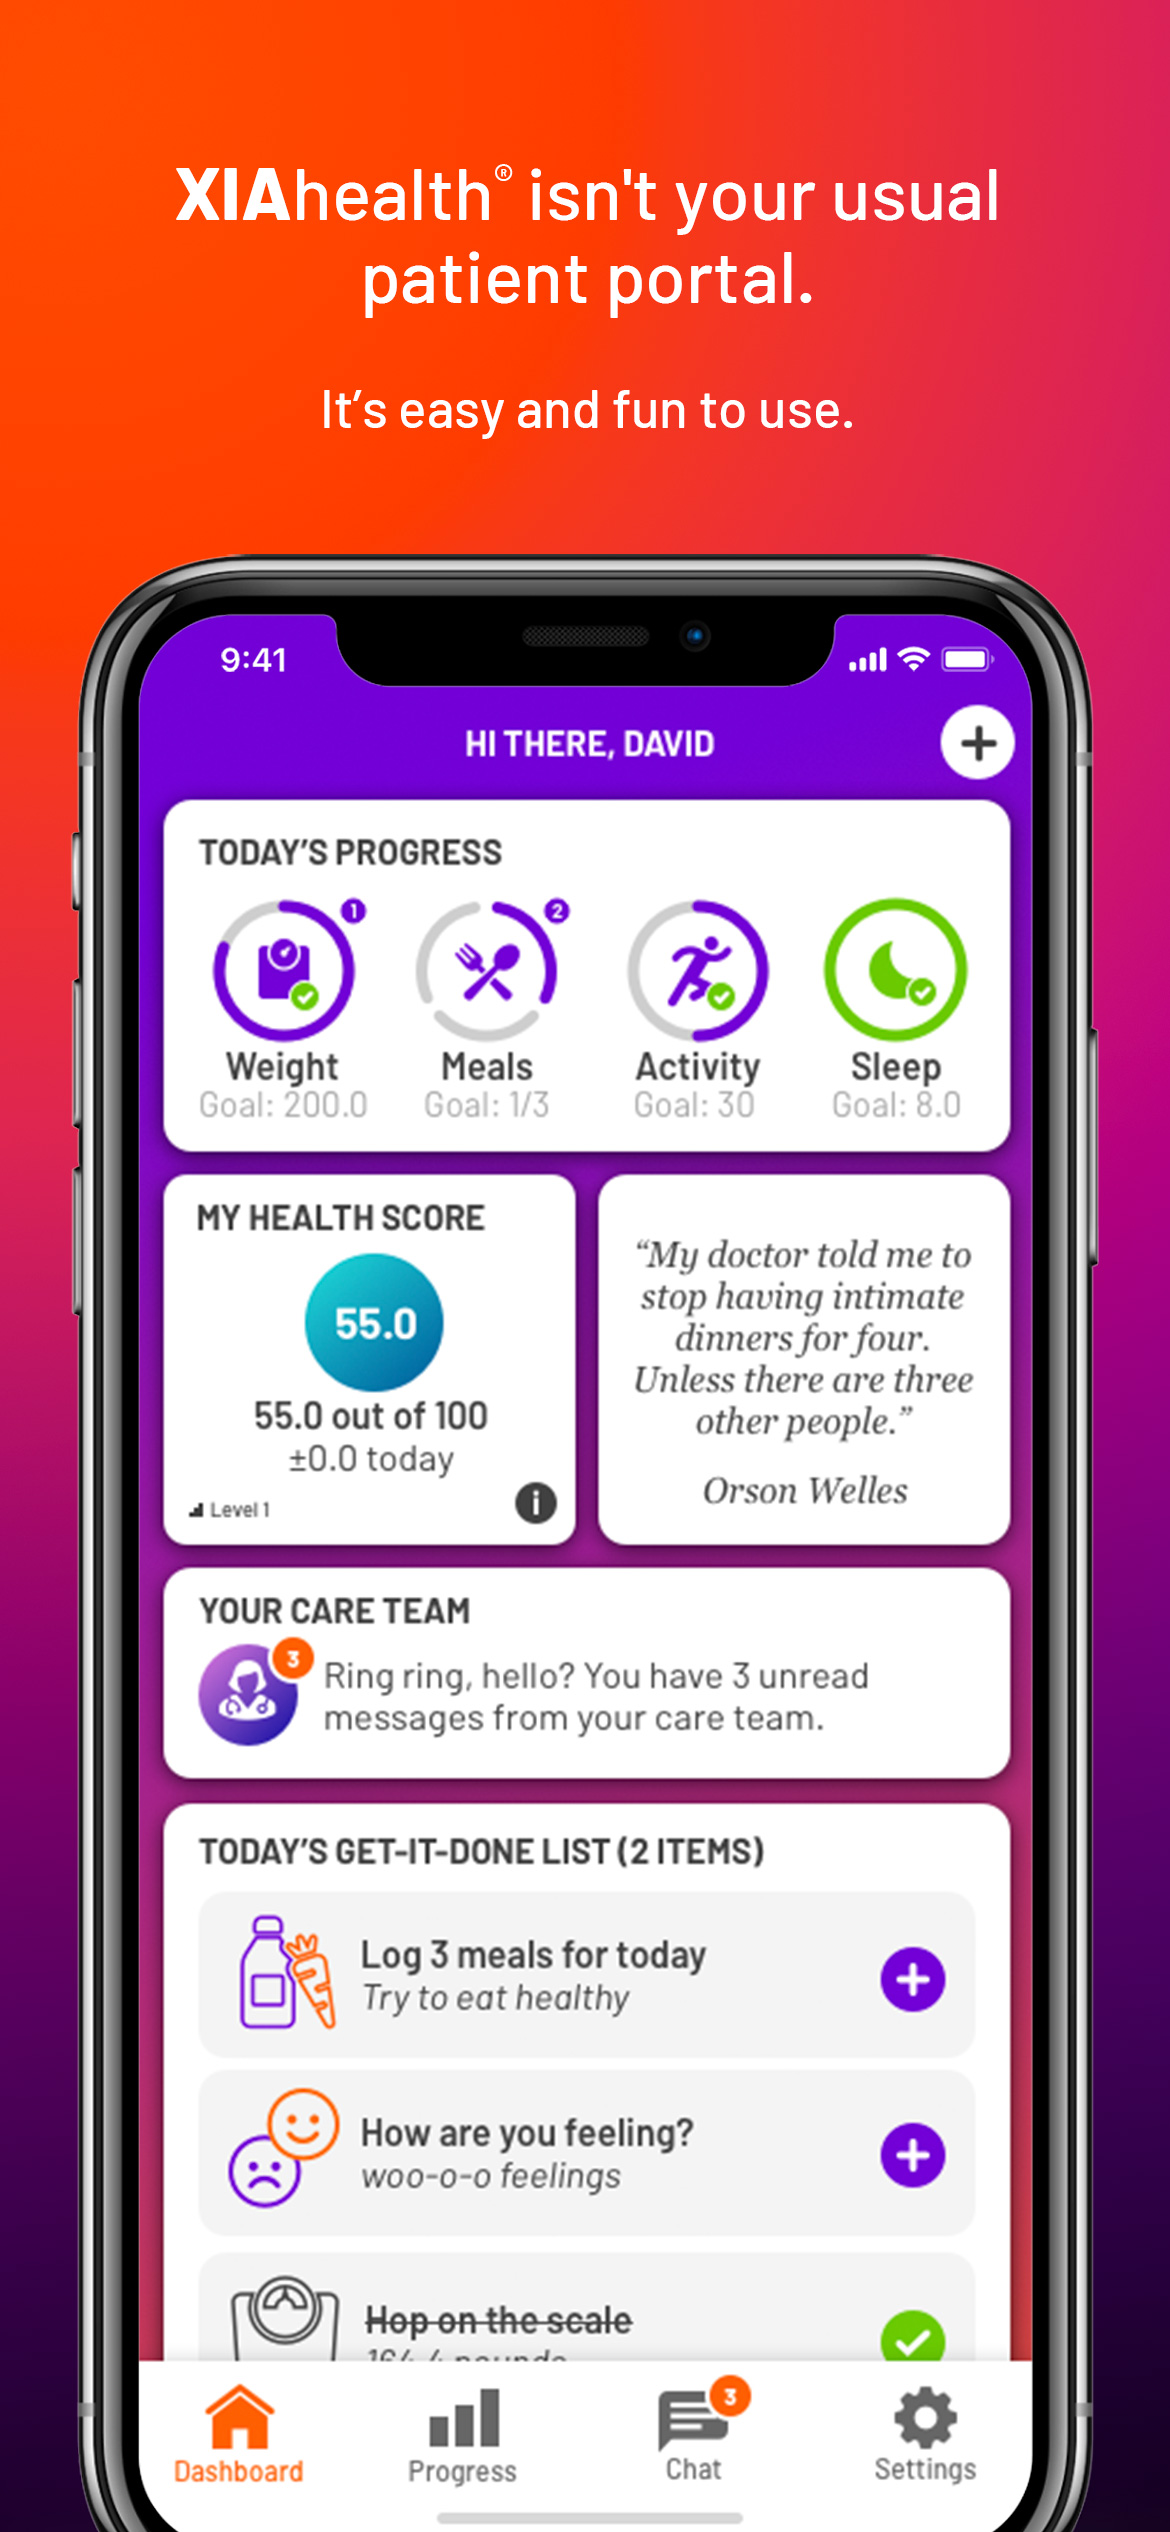 Your patient's dashboard displays a summary of their daily progress toward their health goals, unread messages from you (their trusted care team), their to-do list or care plan, and fun encouragement!